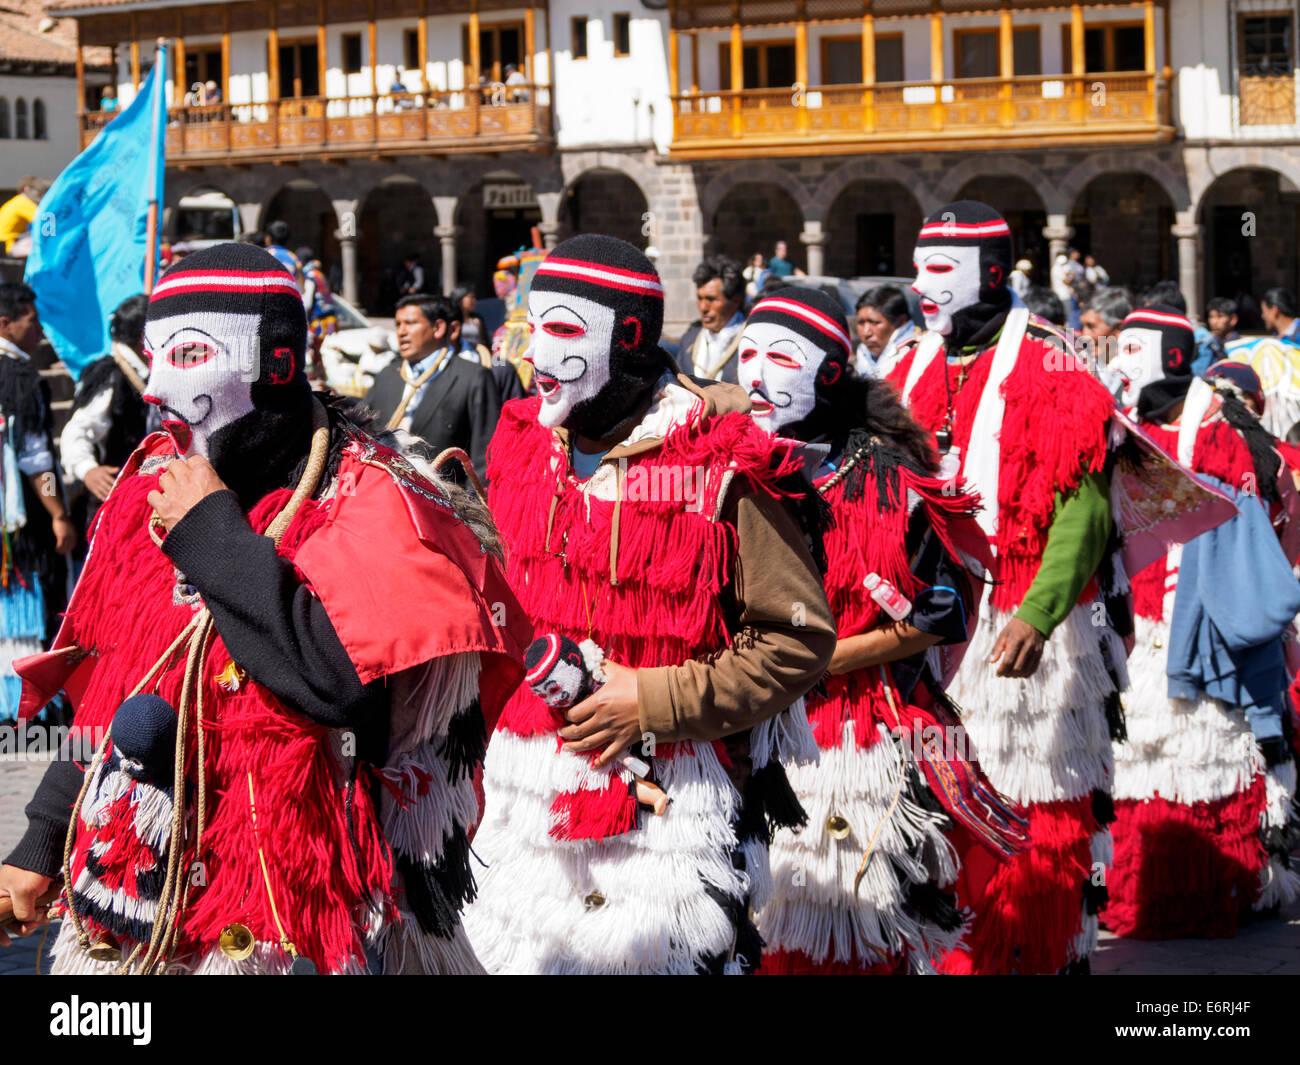 People from all regions gather to Cusco for the Qoyllority (or Qoyllur Rit'i) pilgrimage to the mountain sanctuary of Sinakara - Stock Photo